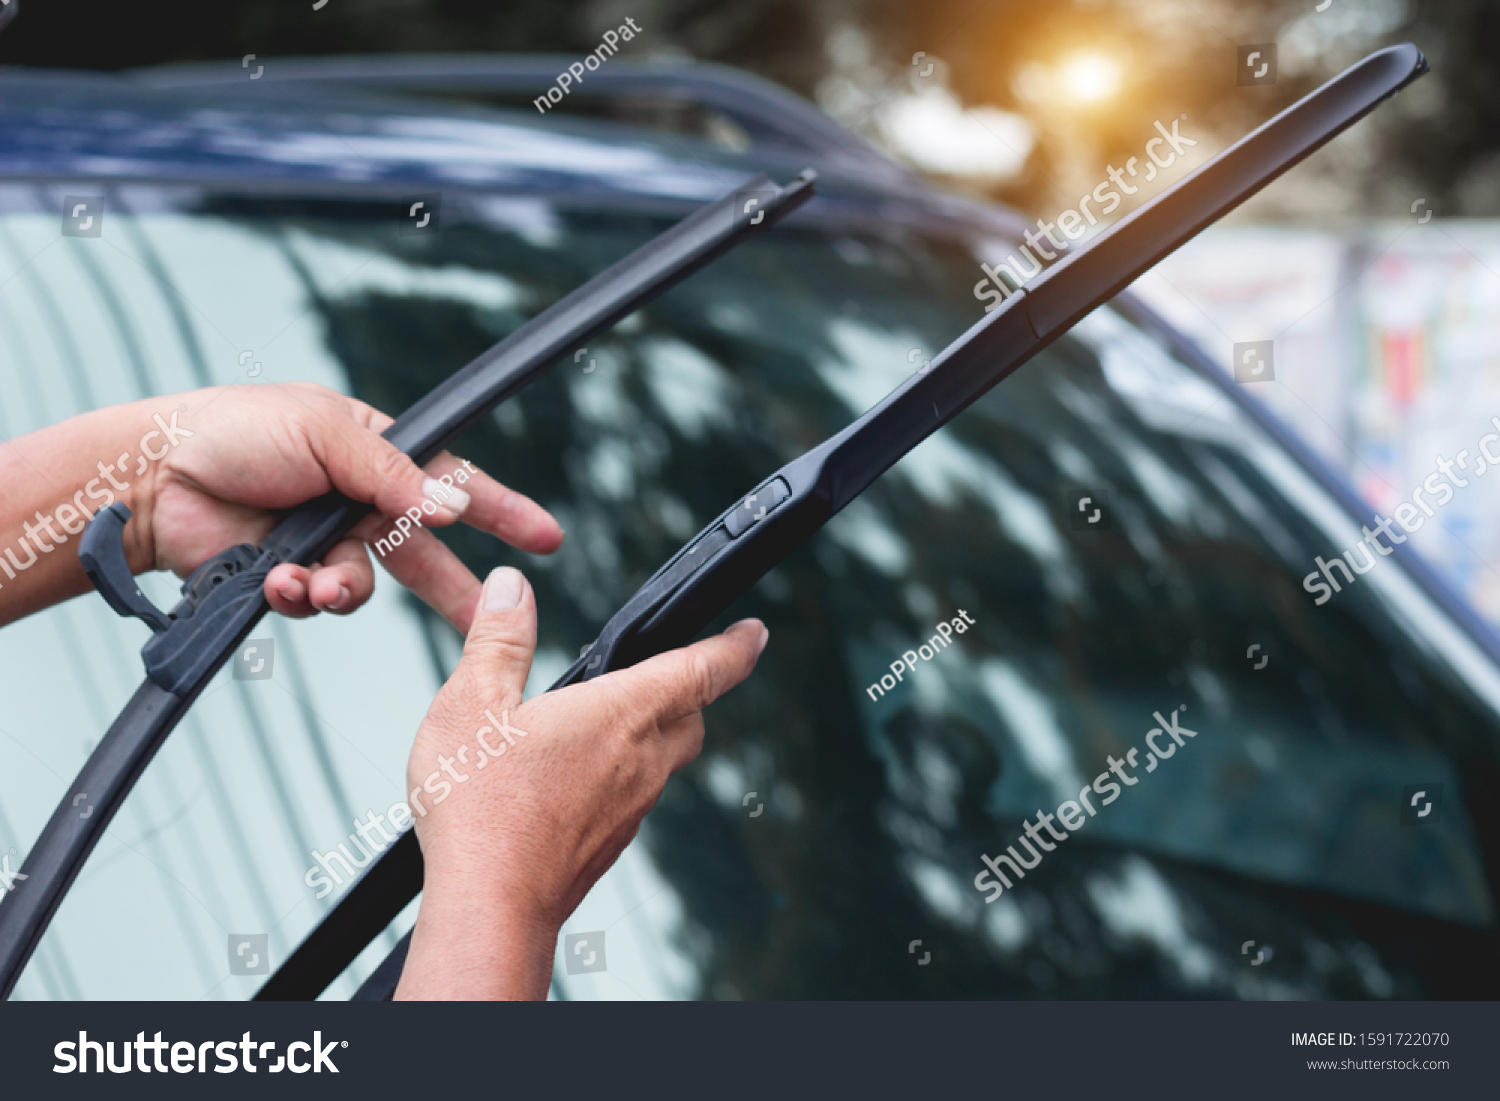 Mechanic replace windshield wipers on car. Replacing wiper blades
Change cars wiper blades. Technician Man changing windshield wipers blades on car. #1591722070